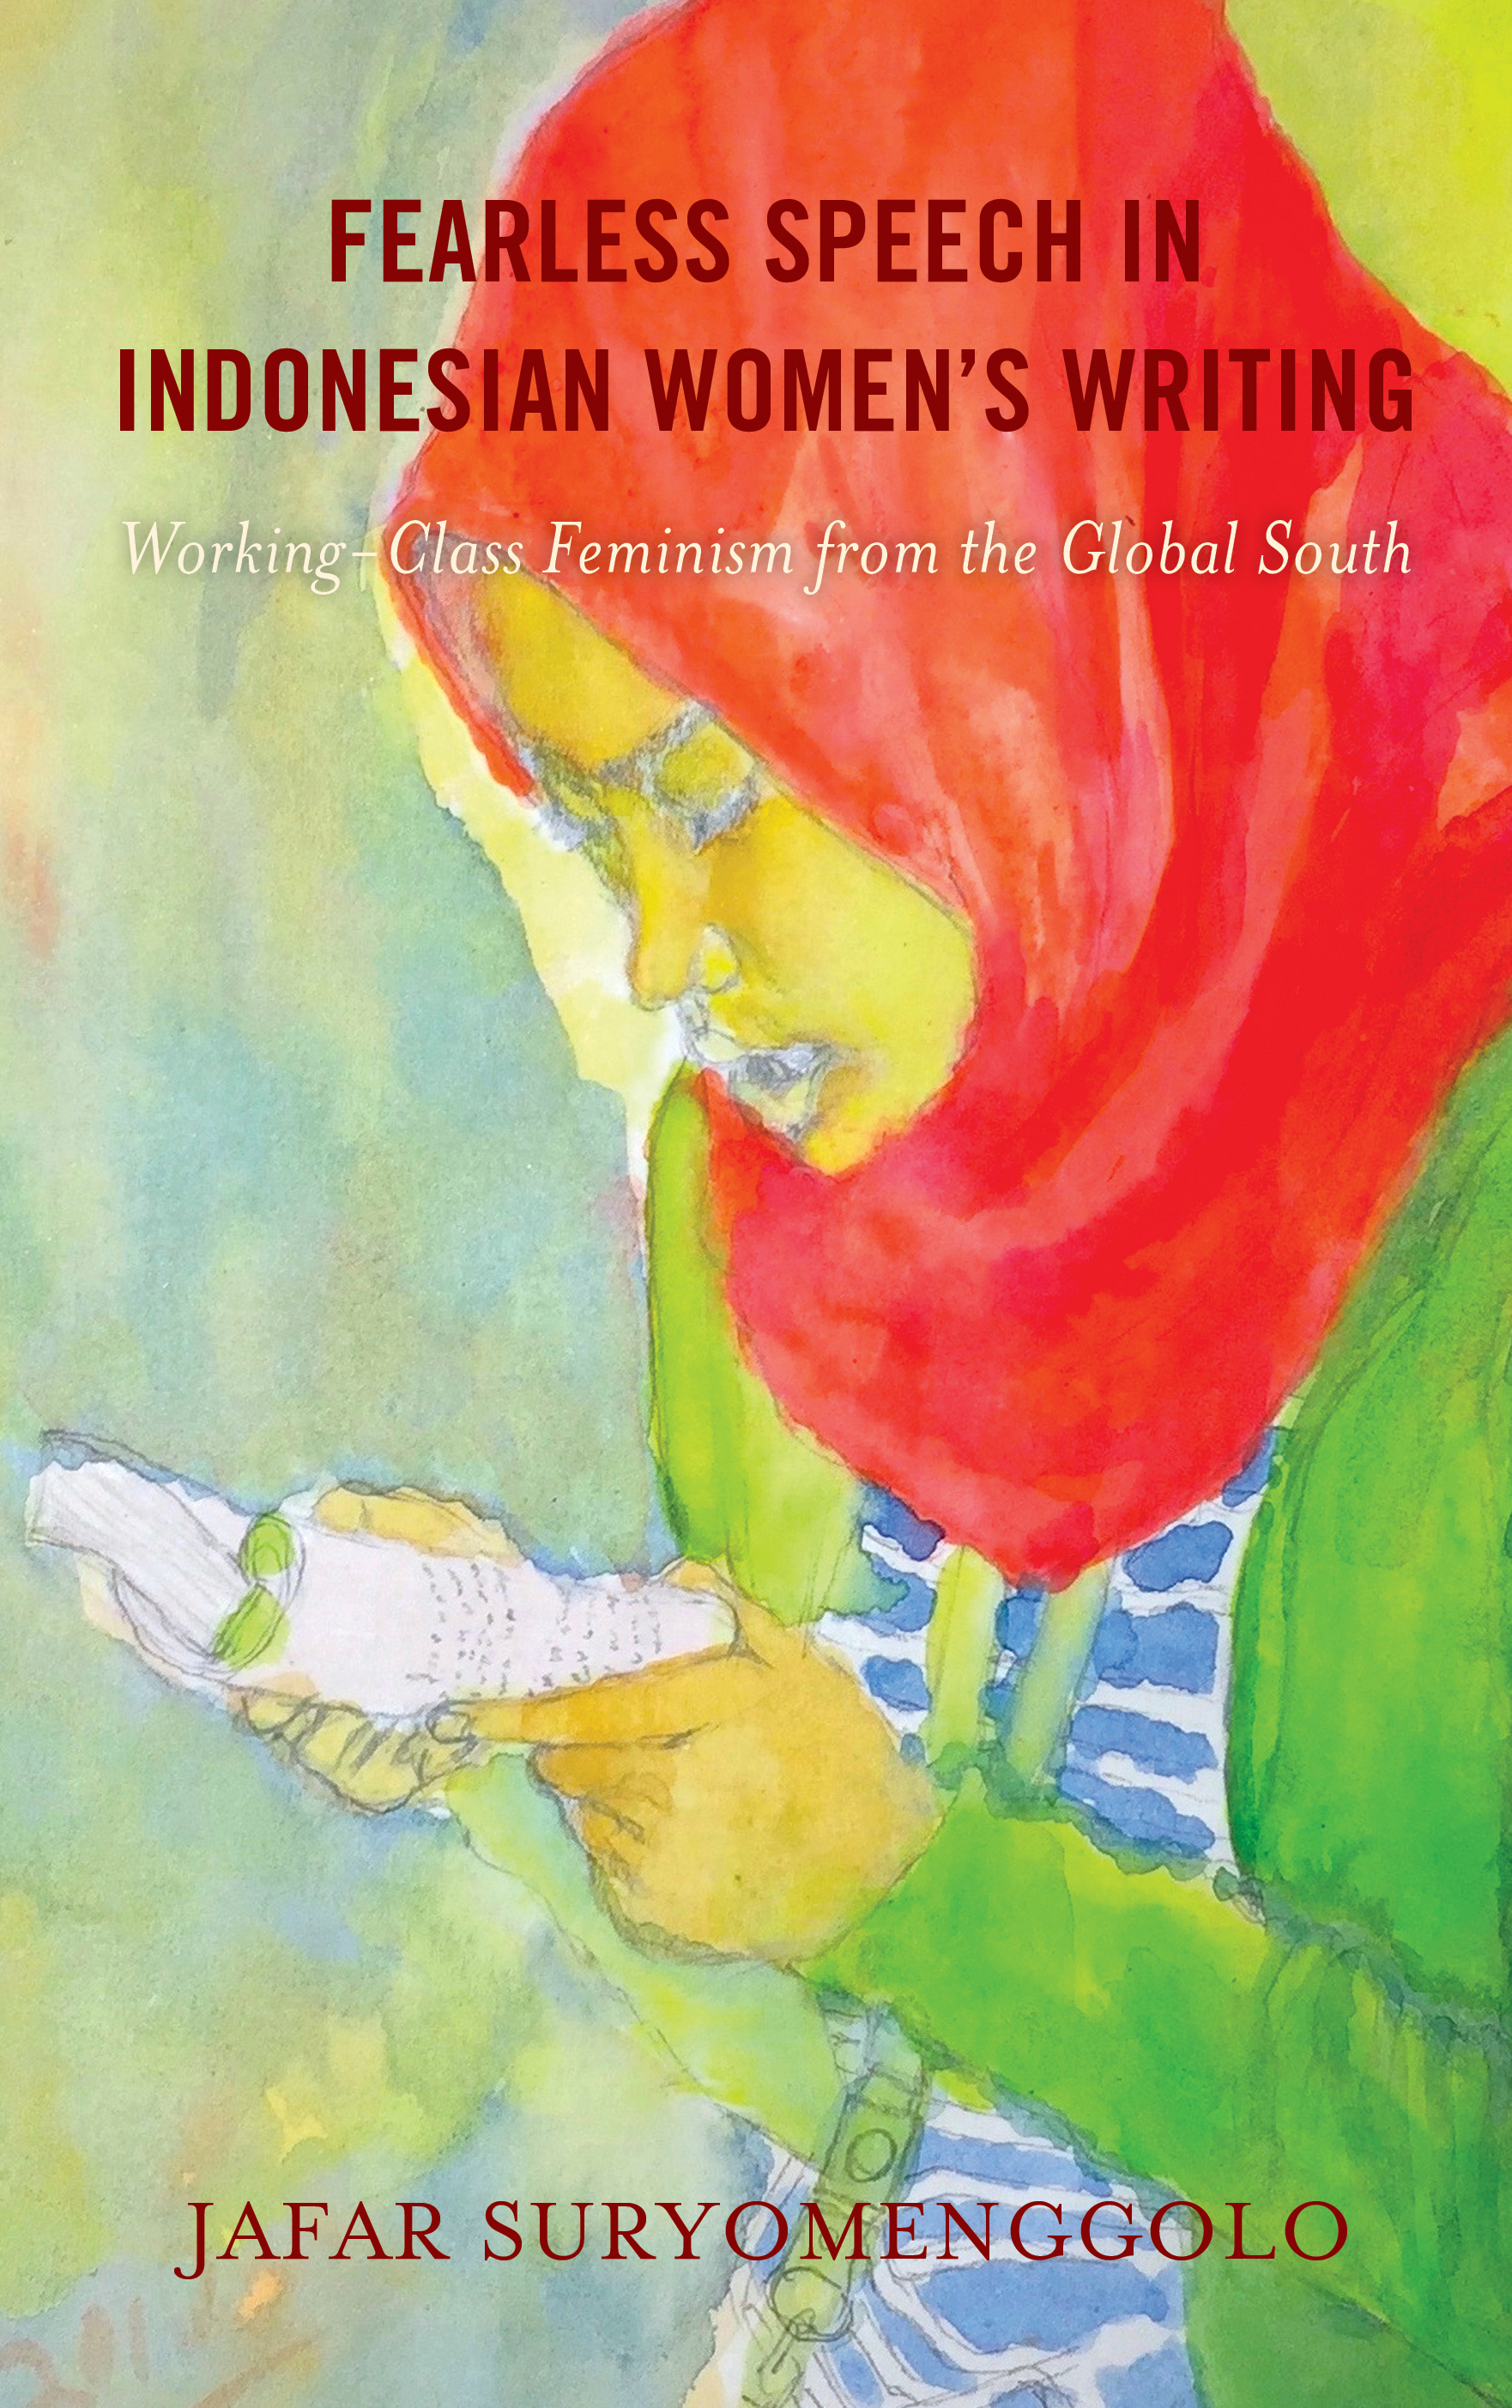 Fearless Speech in Indonesian Women’s Writing: Working-Class Feminism from the Global South